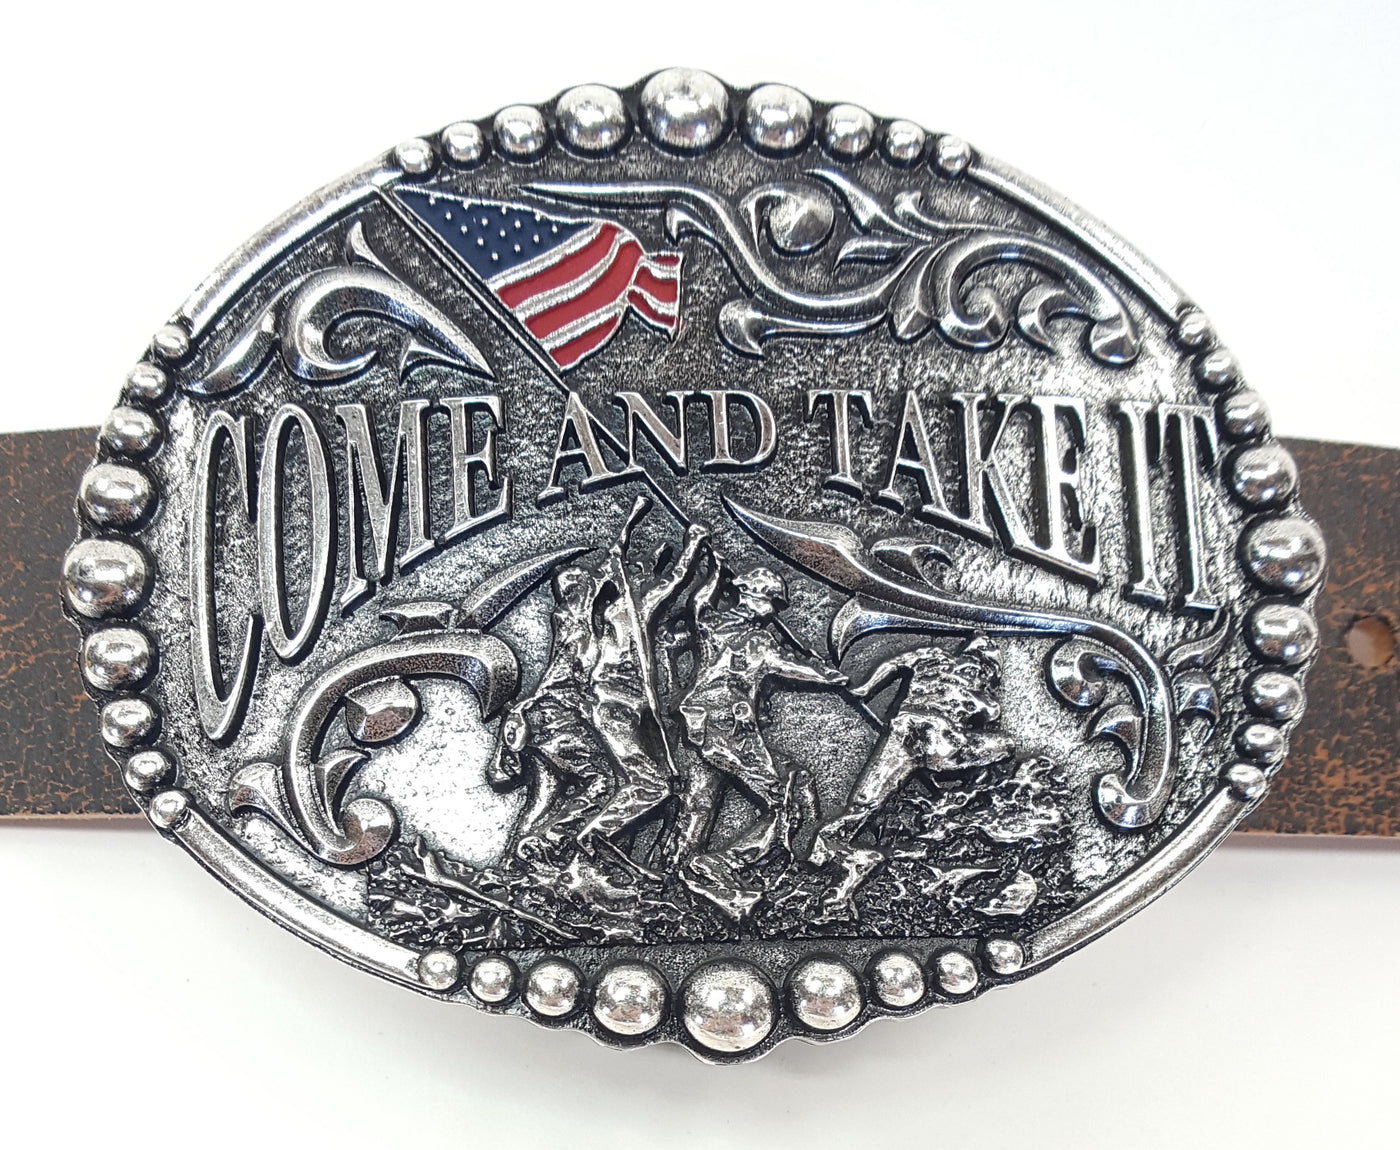 Come and Take It motif buckle by AndWest has Come and Take It wording and pictures soldiers raising and American Flag. Decorative scrolling and designs around edges. Dimensions are 3 2/4" tall by 4 1/4" wide Made in Mexico Available in our online shop as well as in the retail shop in Smyrna, TN, just outside Nashville. Pictured on belt.